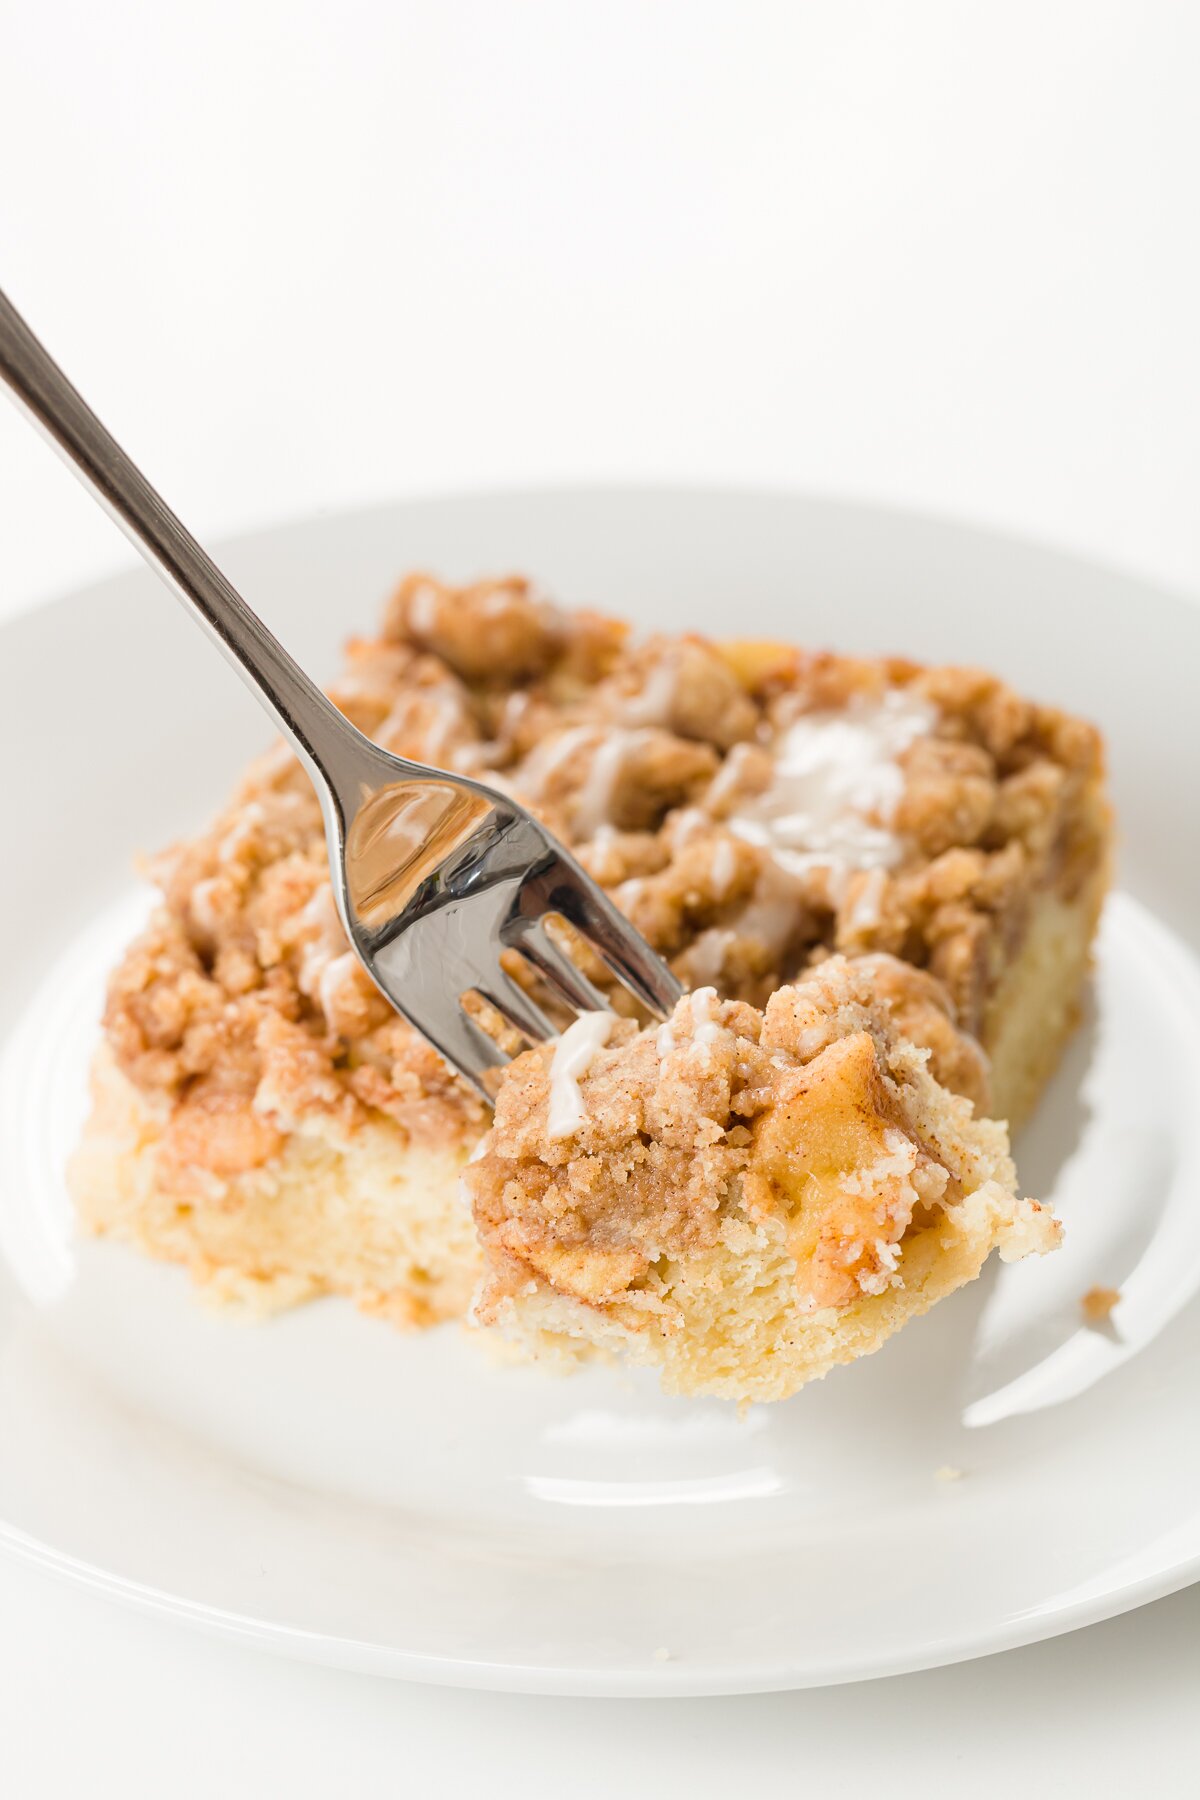 Fork lifting off a bite of apple crumb cake